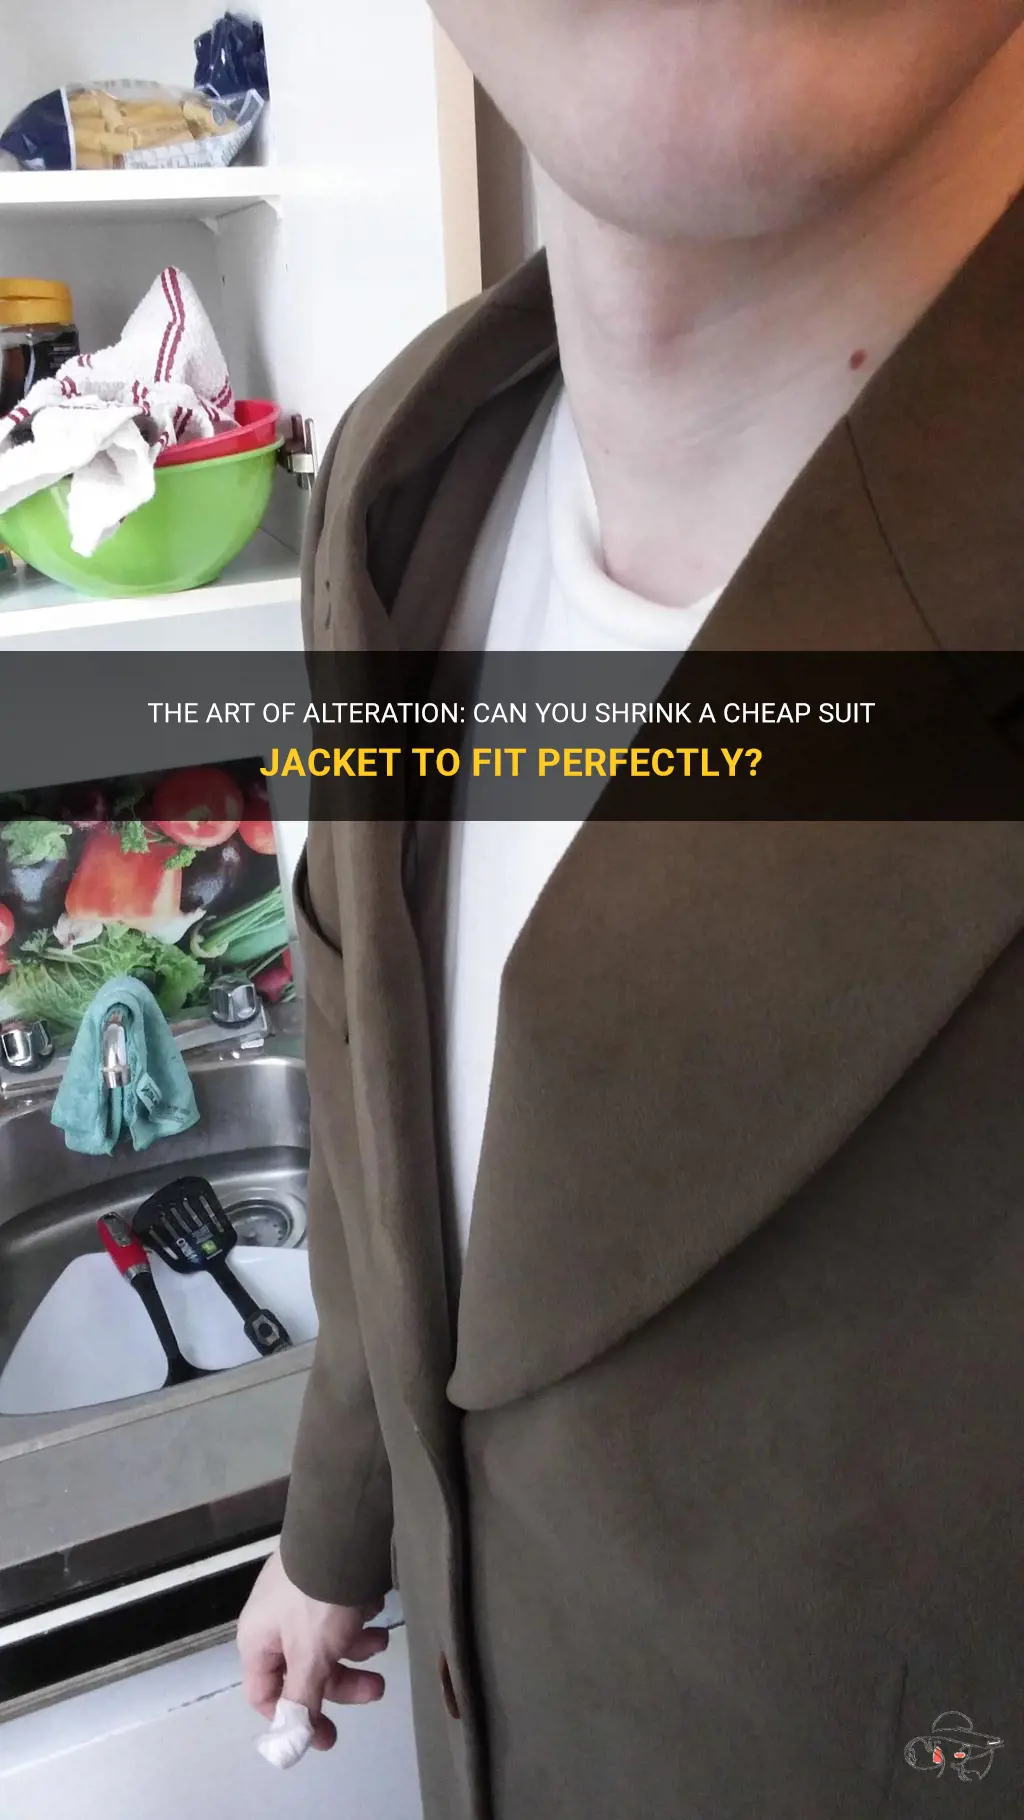 is there a way to shrink a cheap suit jacket